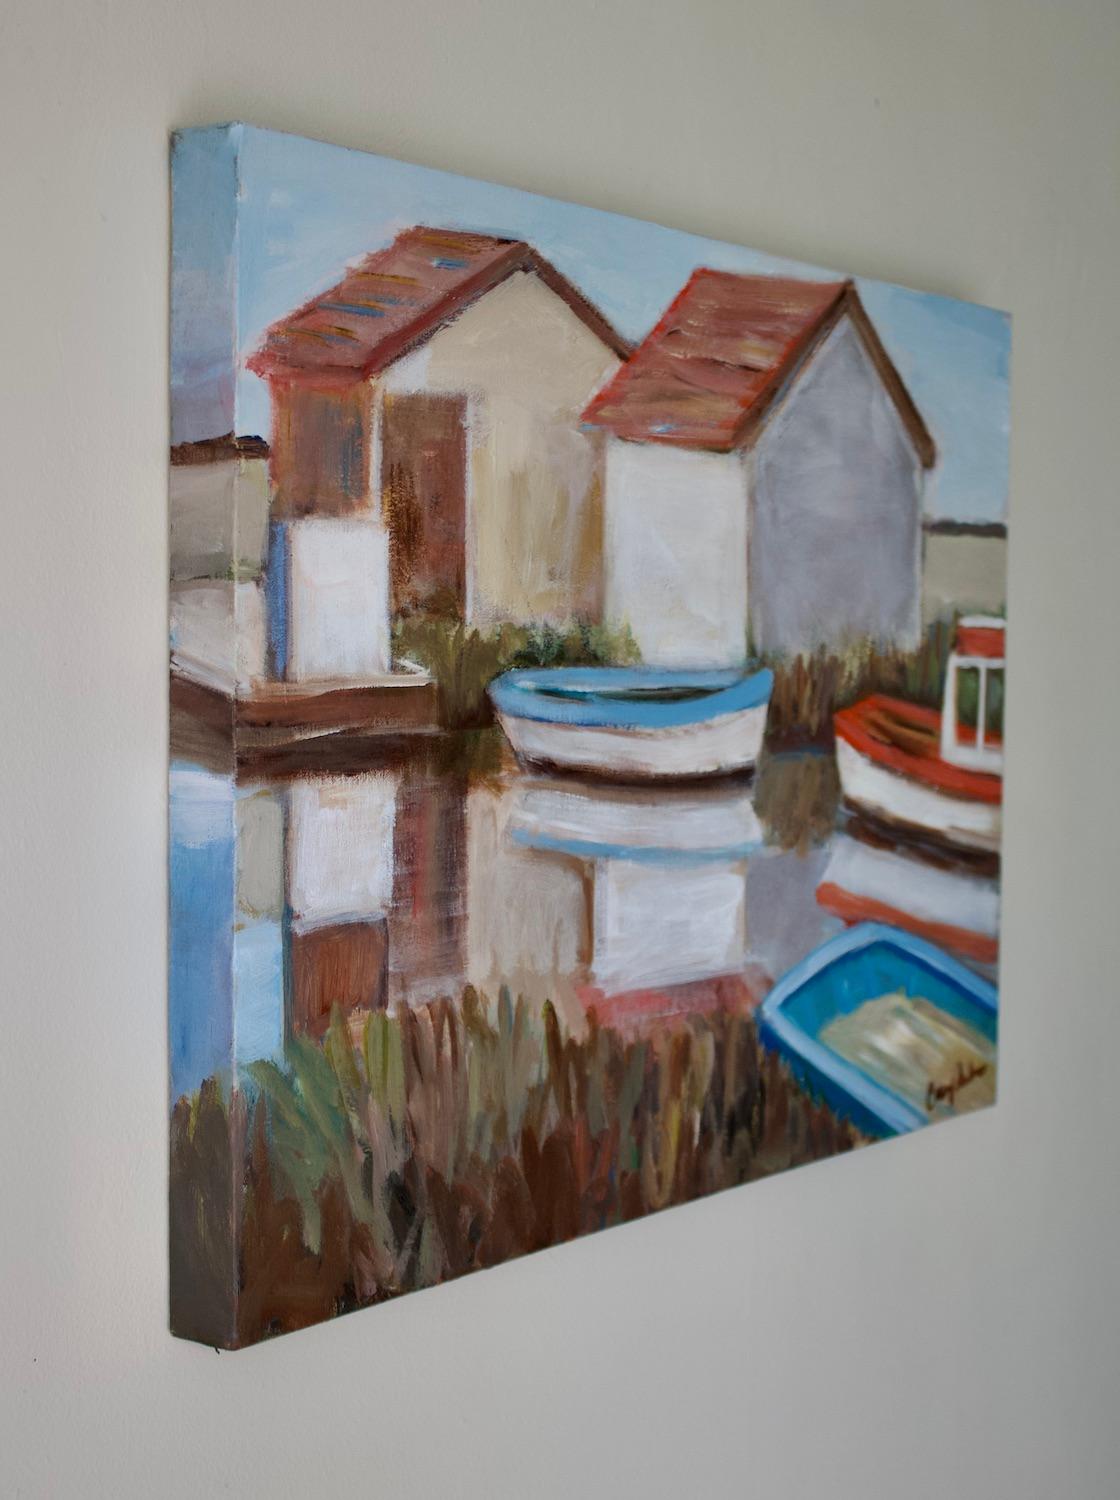 <p>Artist Comments<br>Fishing huts stand along a channel, with oyster boats docked on the side. Their gentle reflections mirror almost perfectly on the still water. The muted palette with vibrant blue and orange accents and soft strokes conveys the